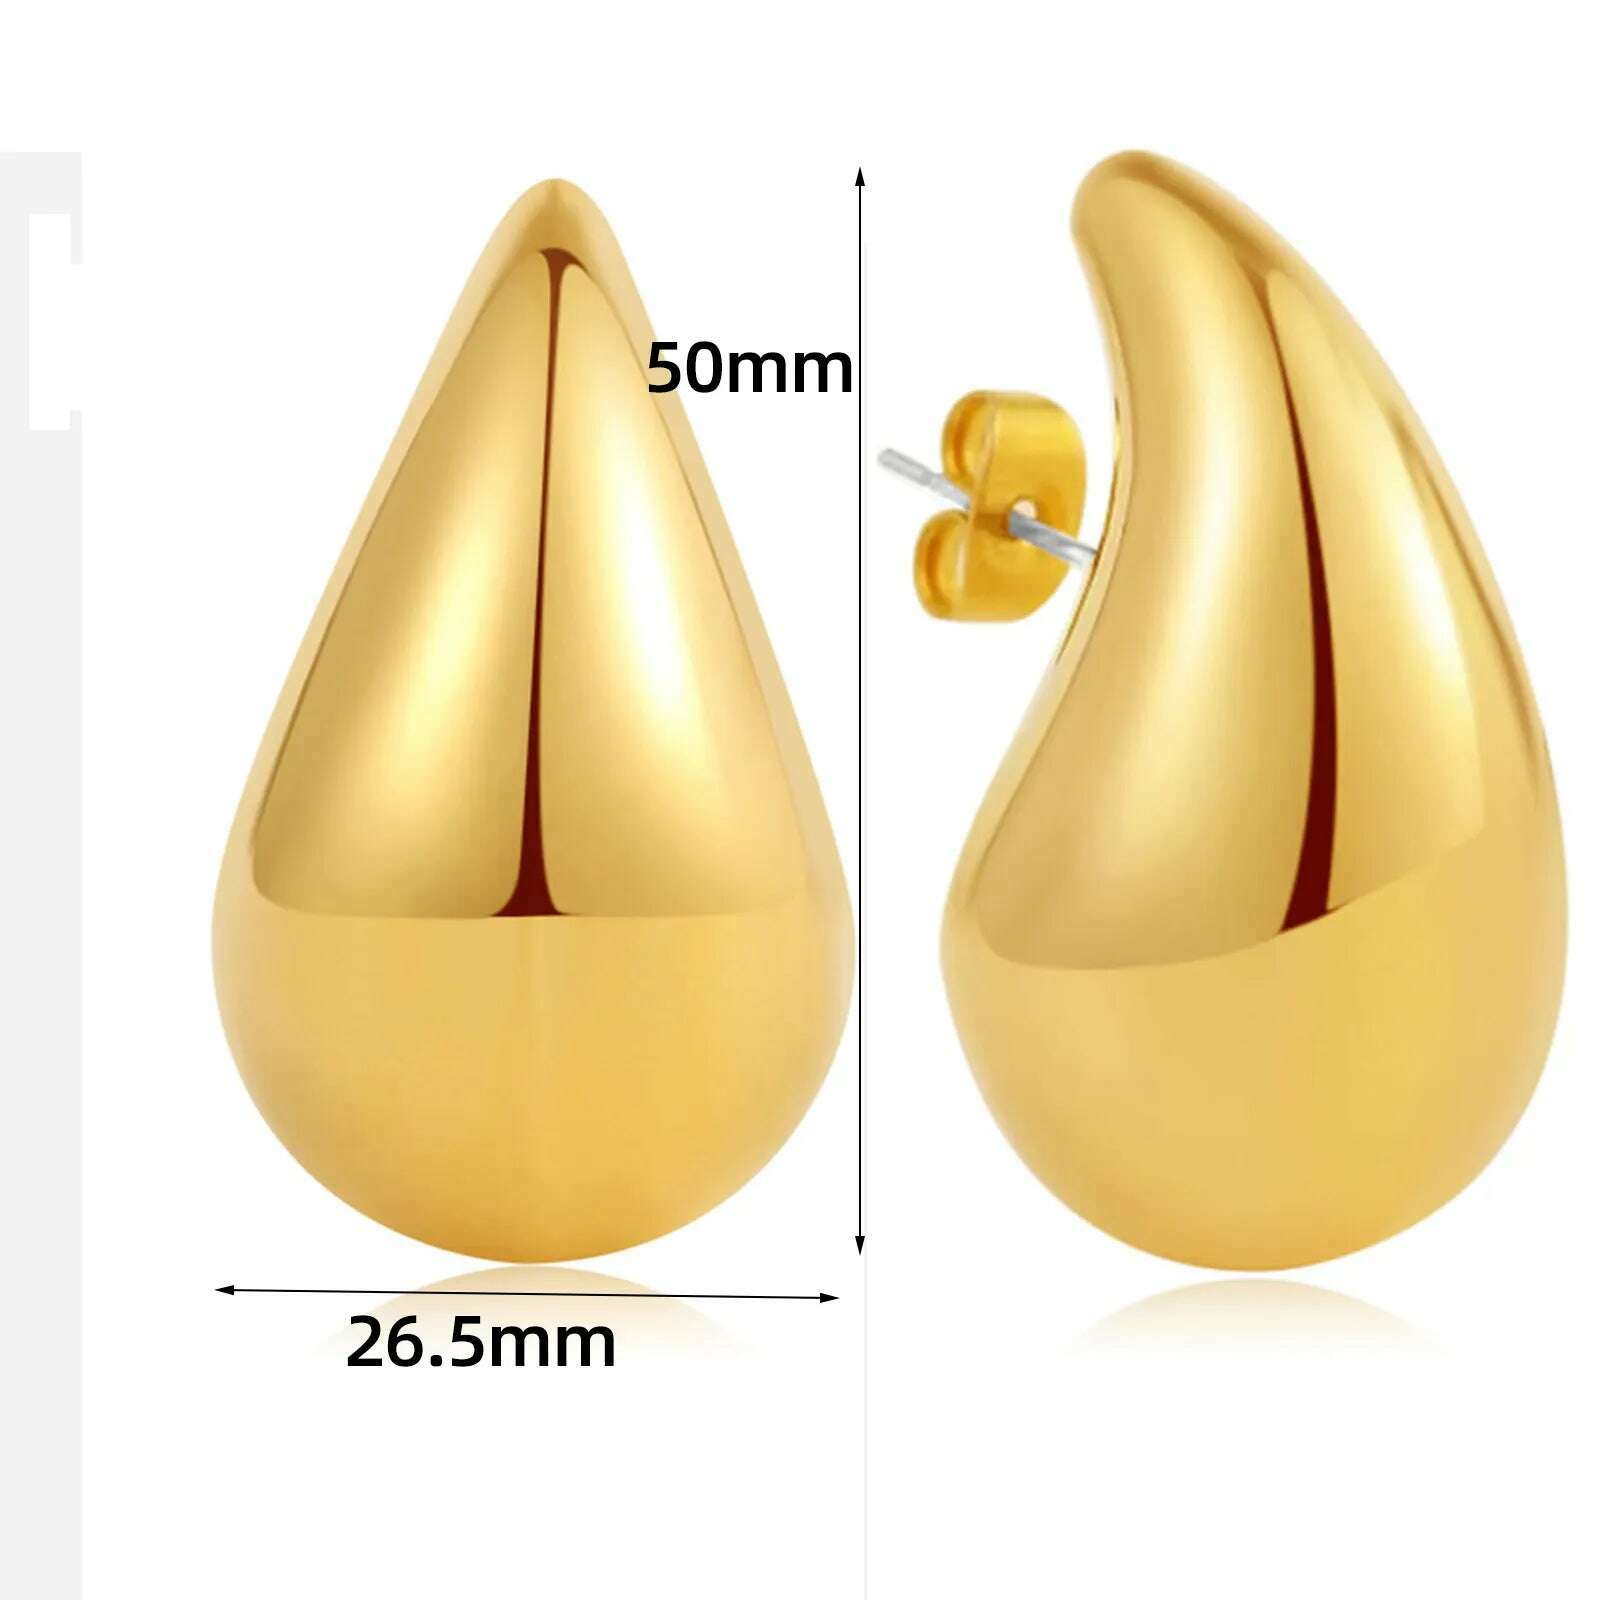 KIMLUD, Exaggerate 50mm Big Water Drop 18K Gold Plated Metal Oversize Dupes Thick Drop Earrings Lightweight Stainless Steel Jewelry New, gold color, KIMLUD Women's Clothes